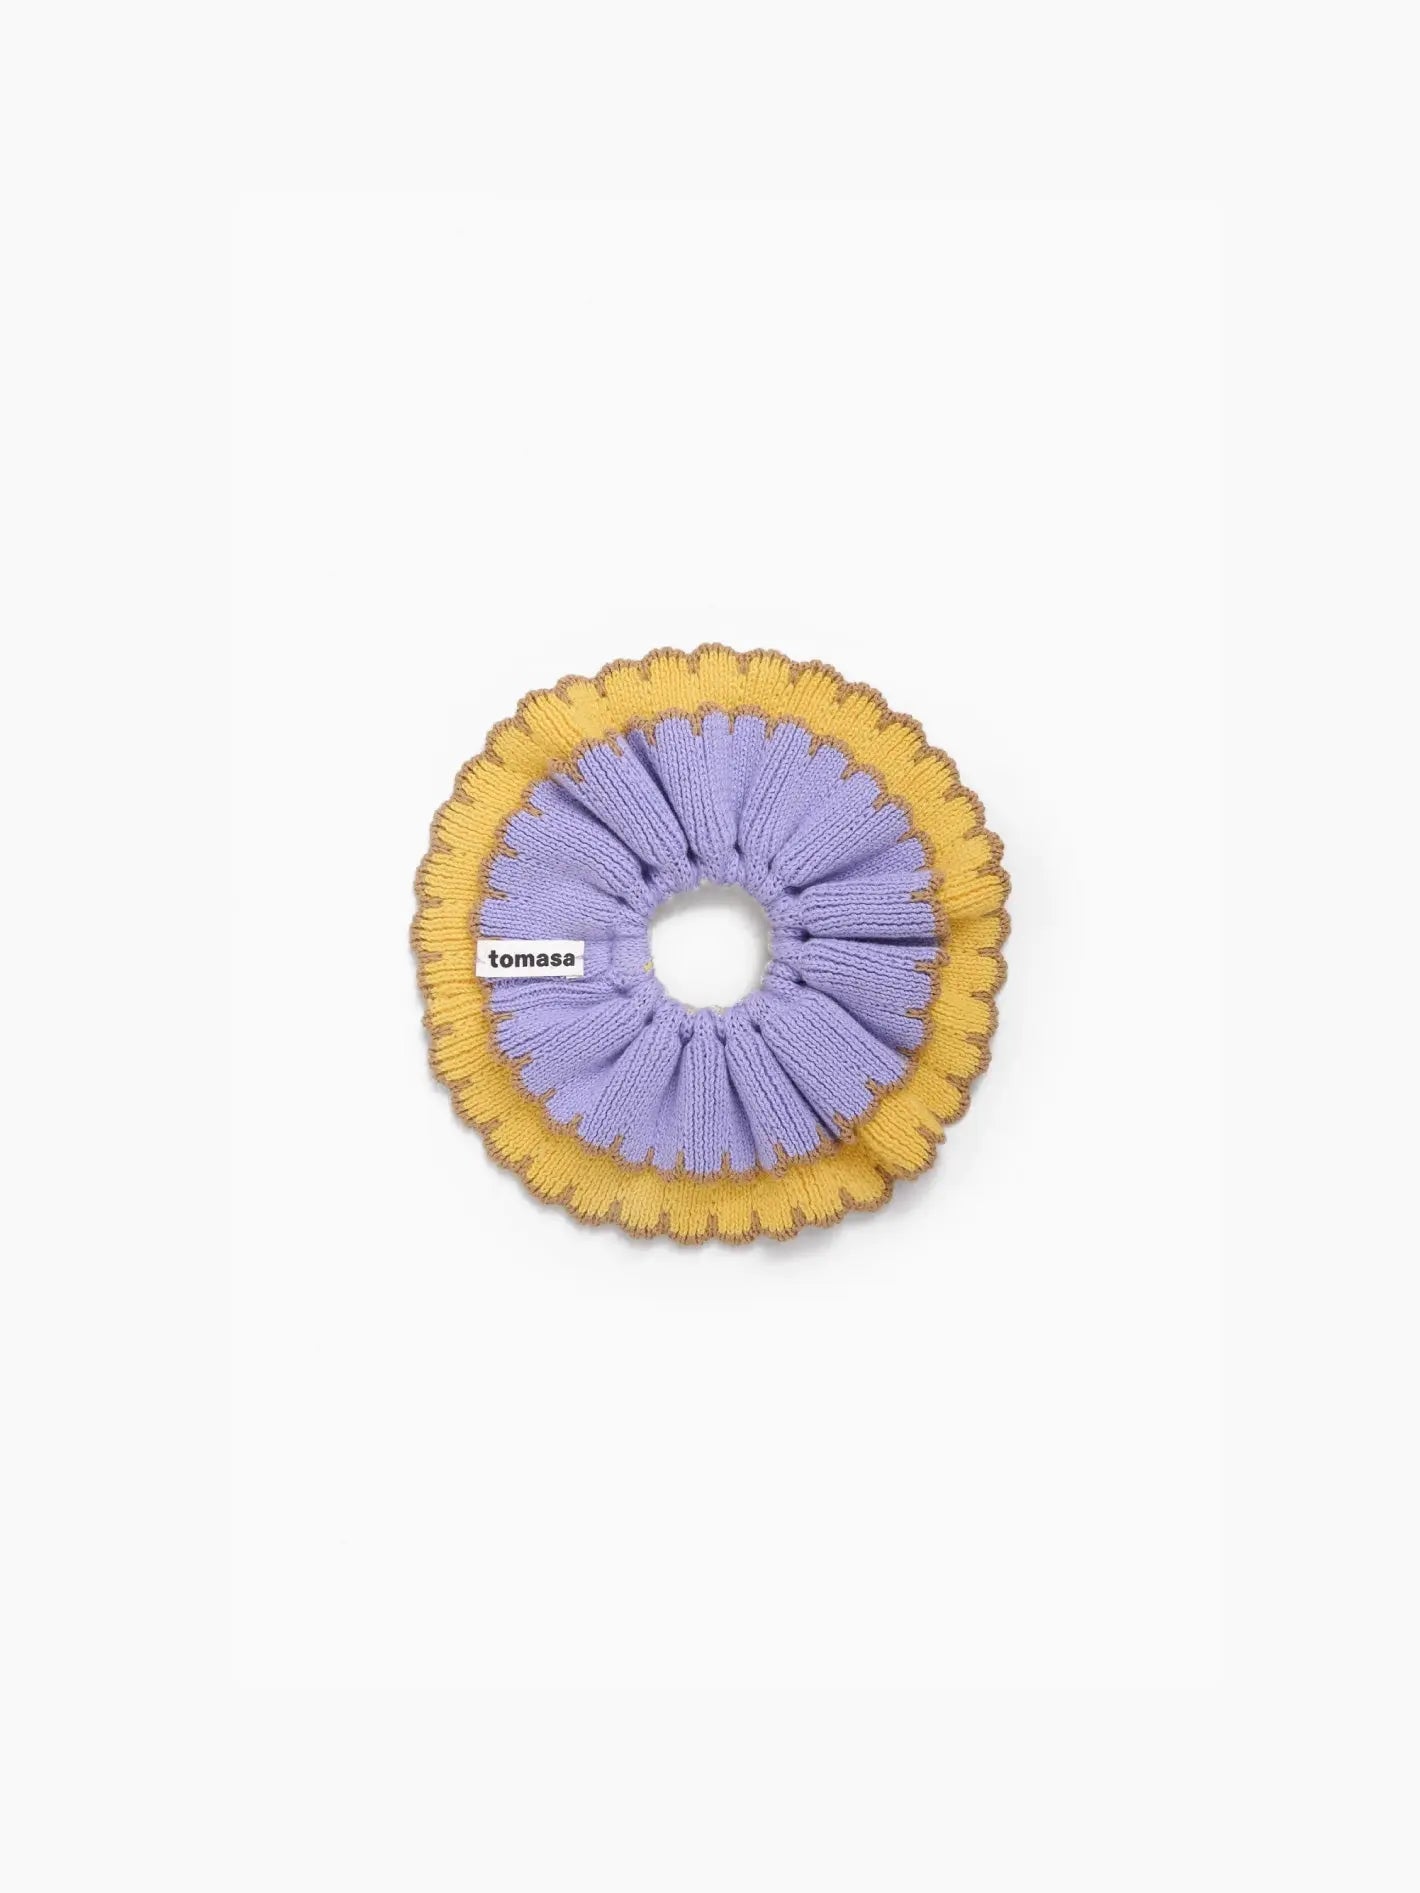 A circular, two-tone scrunchie called the "Ruffle Scrunchie Amanecer" by Tomasa is displayed against a white background. The outer part is yellow, and the inner part is purple with a ridged design. A small fabric label with the text "Tomasa" is attached to the inner part of the scrunchie, available exclusively at Bassalstore in Barcelona.